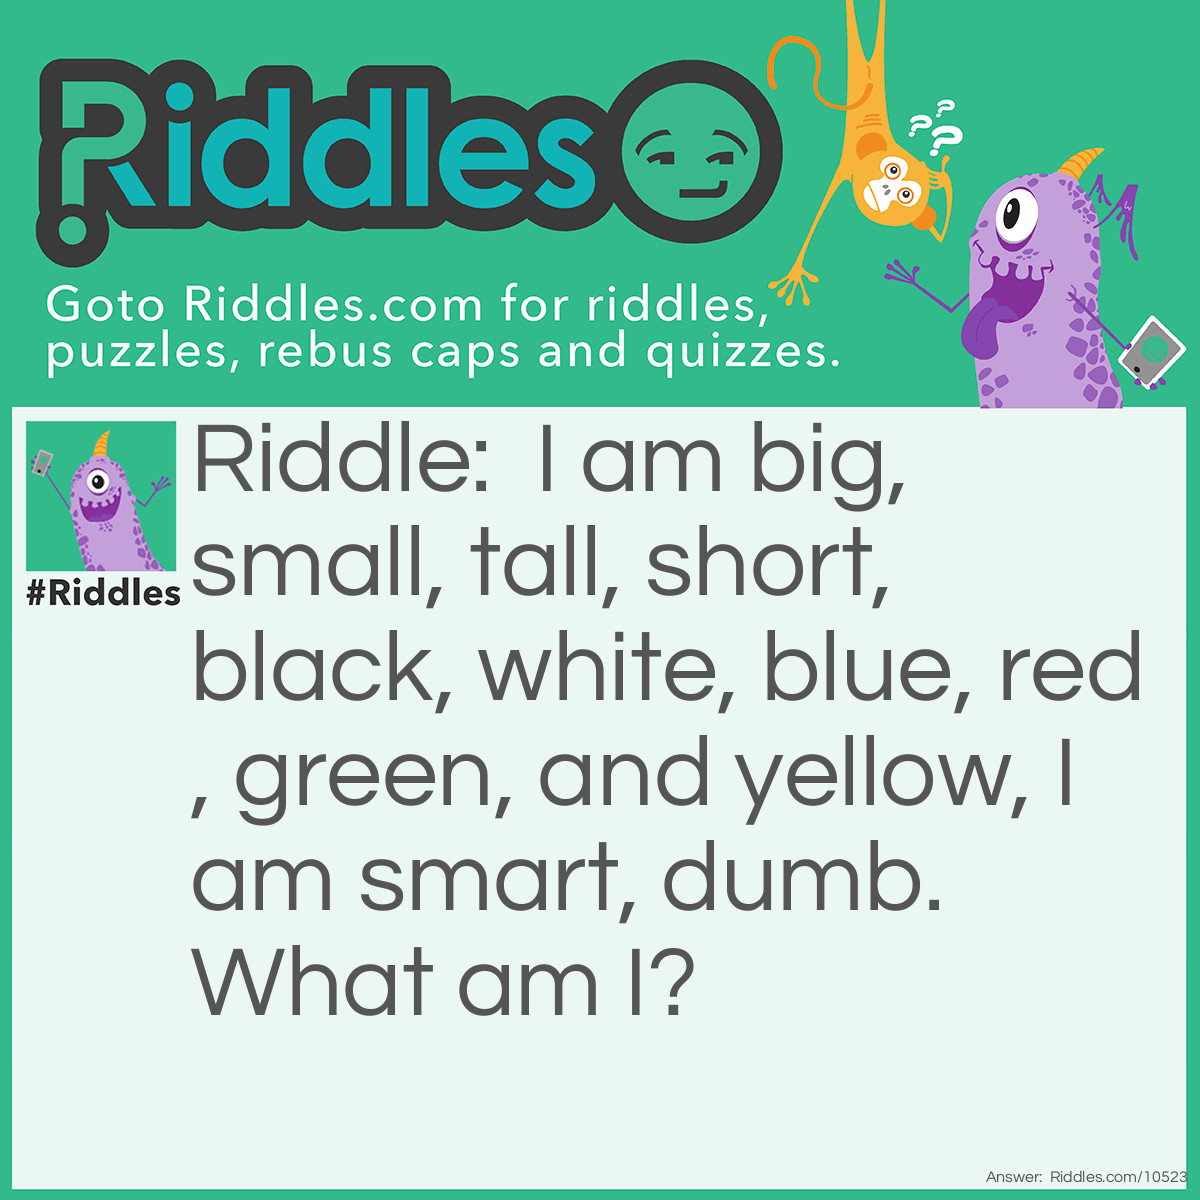 Riddle: I am big, small, tall, short, black, white, blue, red, green, and yellow, I am smart, dumb. What am I? Answer: A Liar!